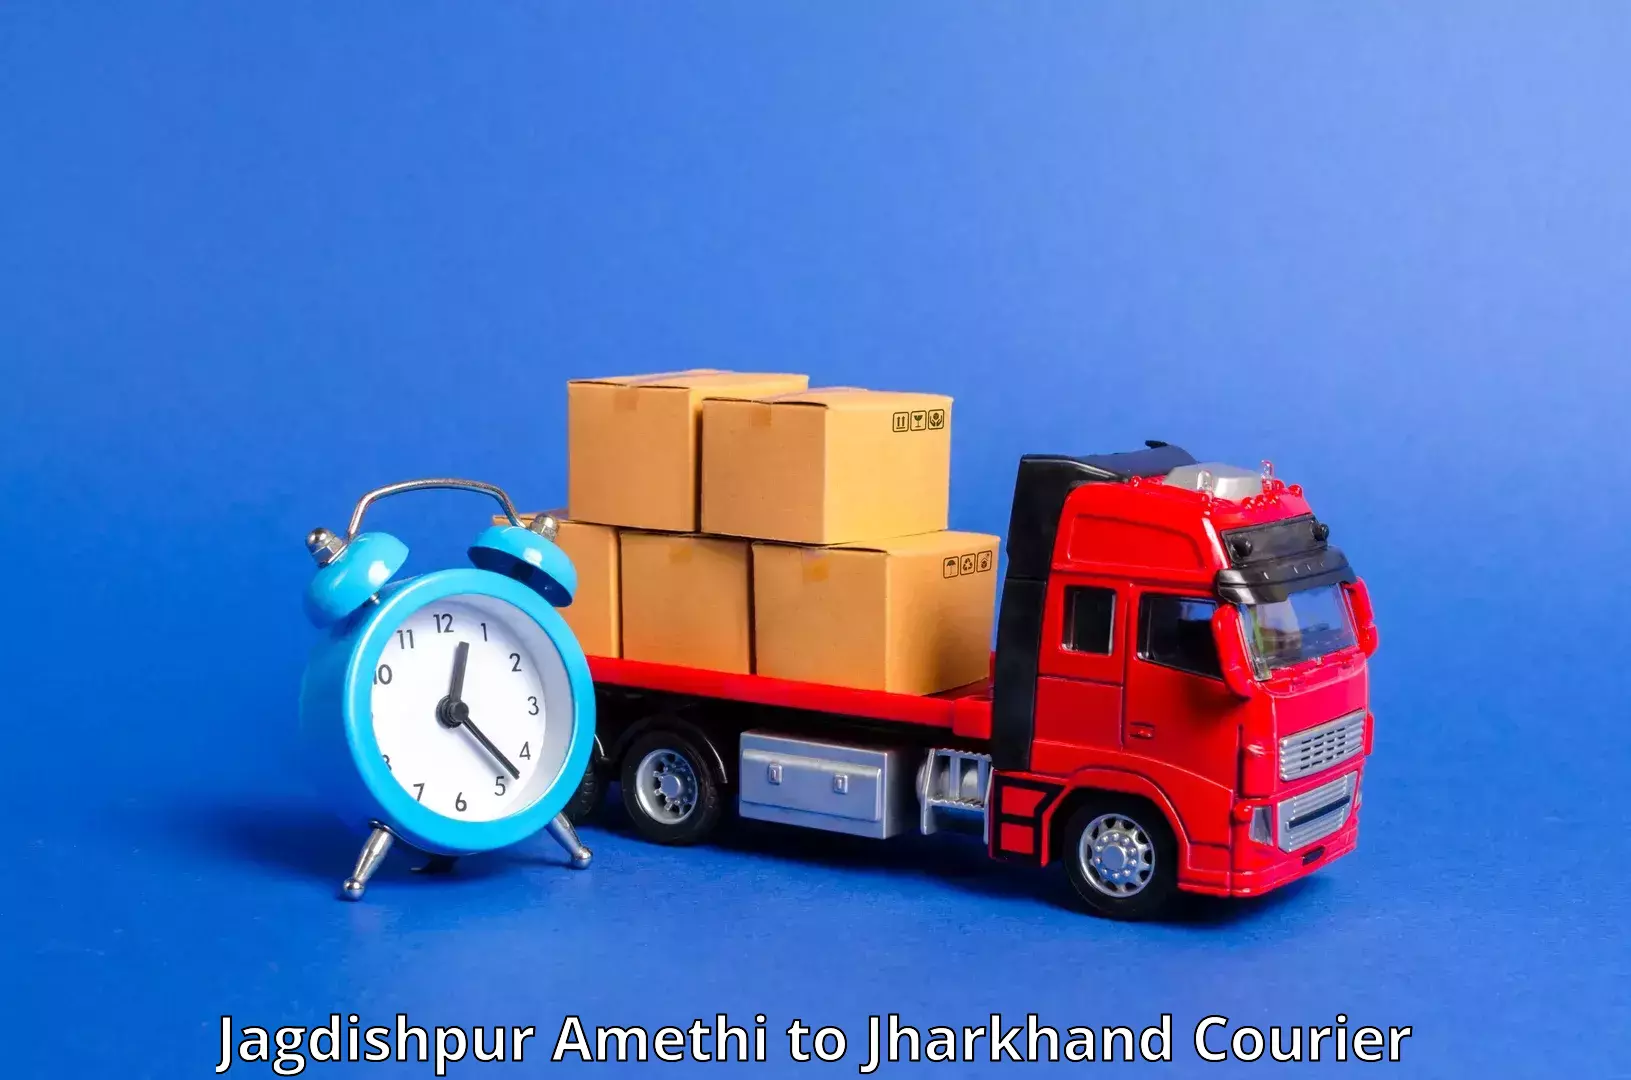 Cost-effective shipping solutions Jagdishpur Amethi to Dhanbad